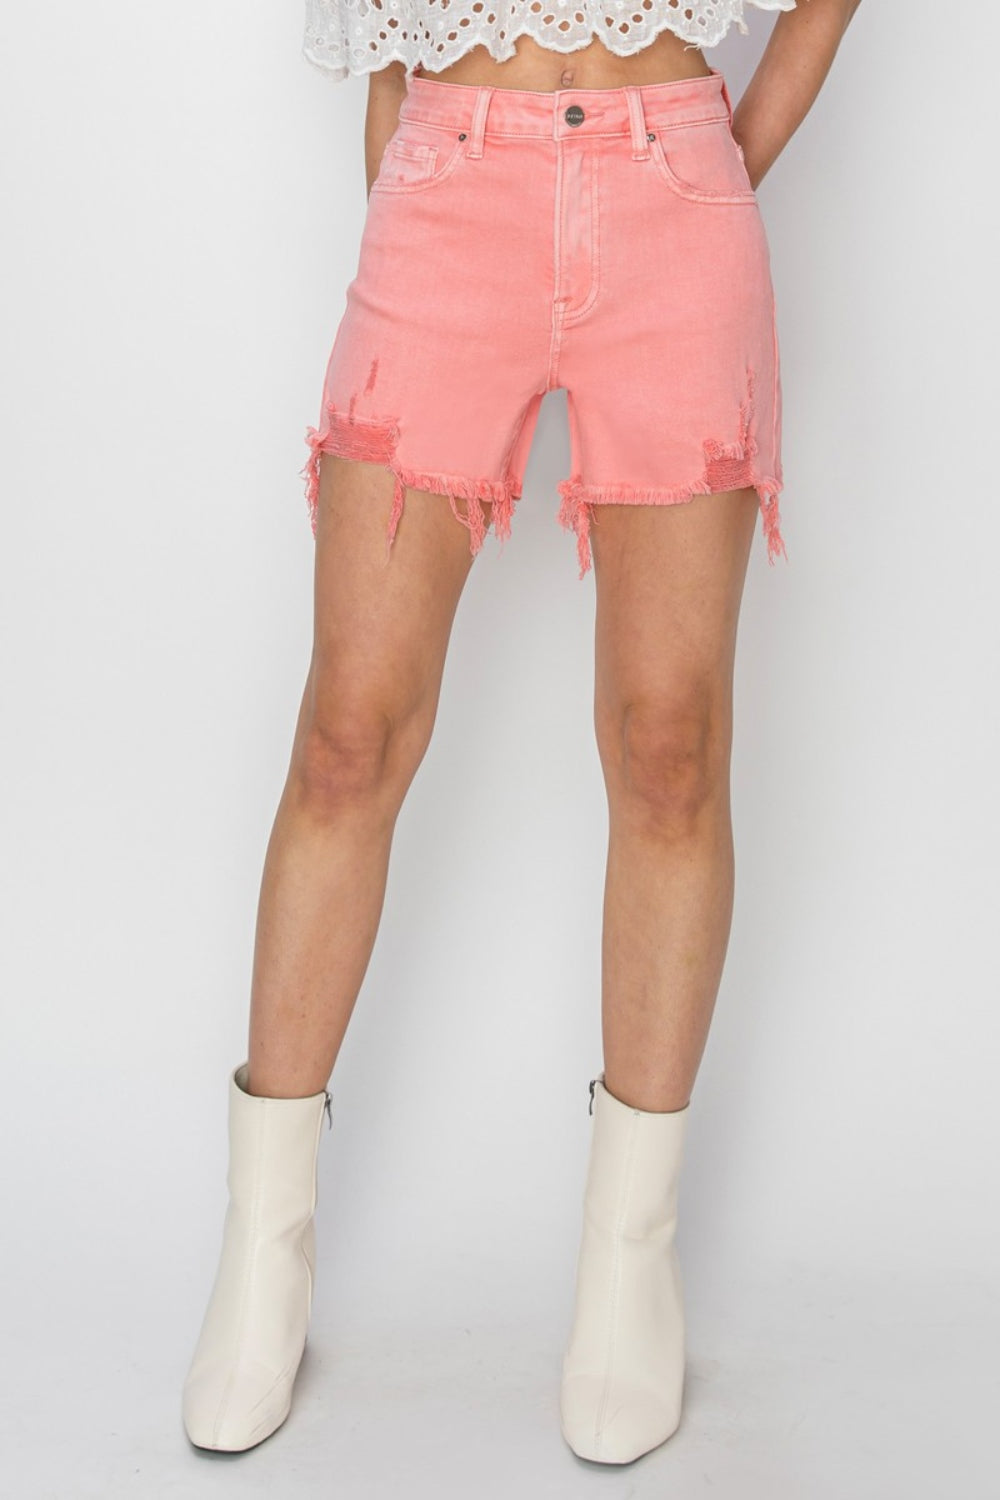 RISEN High Rise Distressed Denim Shorts in Pink Flamingo Southern Soul Collectives